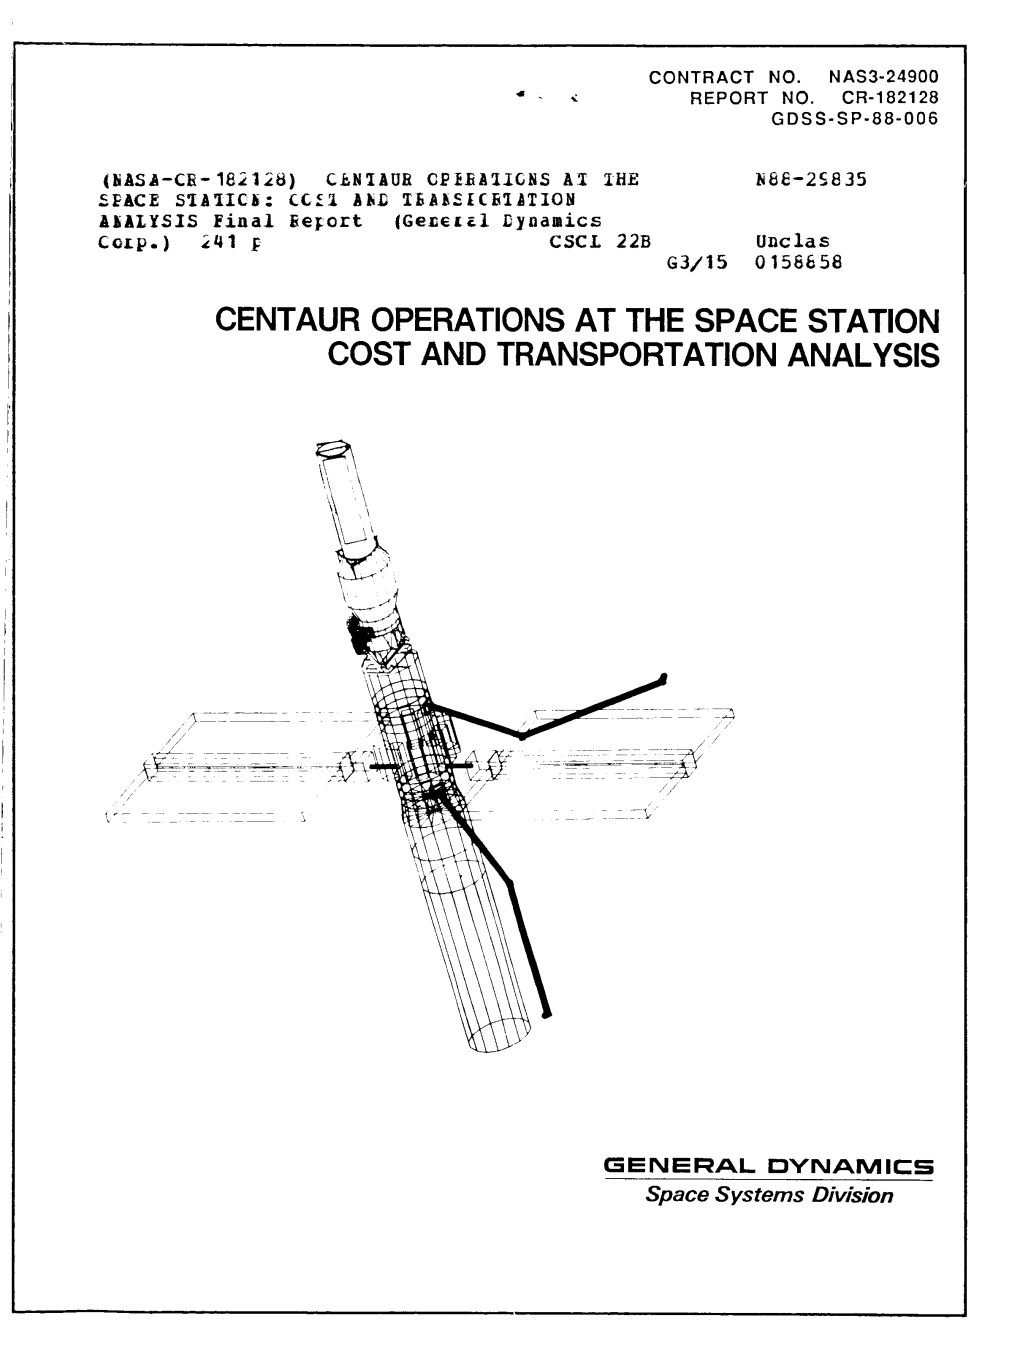 Centaur Operations at the Space Station Cost and Transportation Analysis